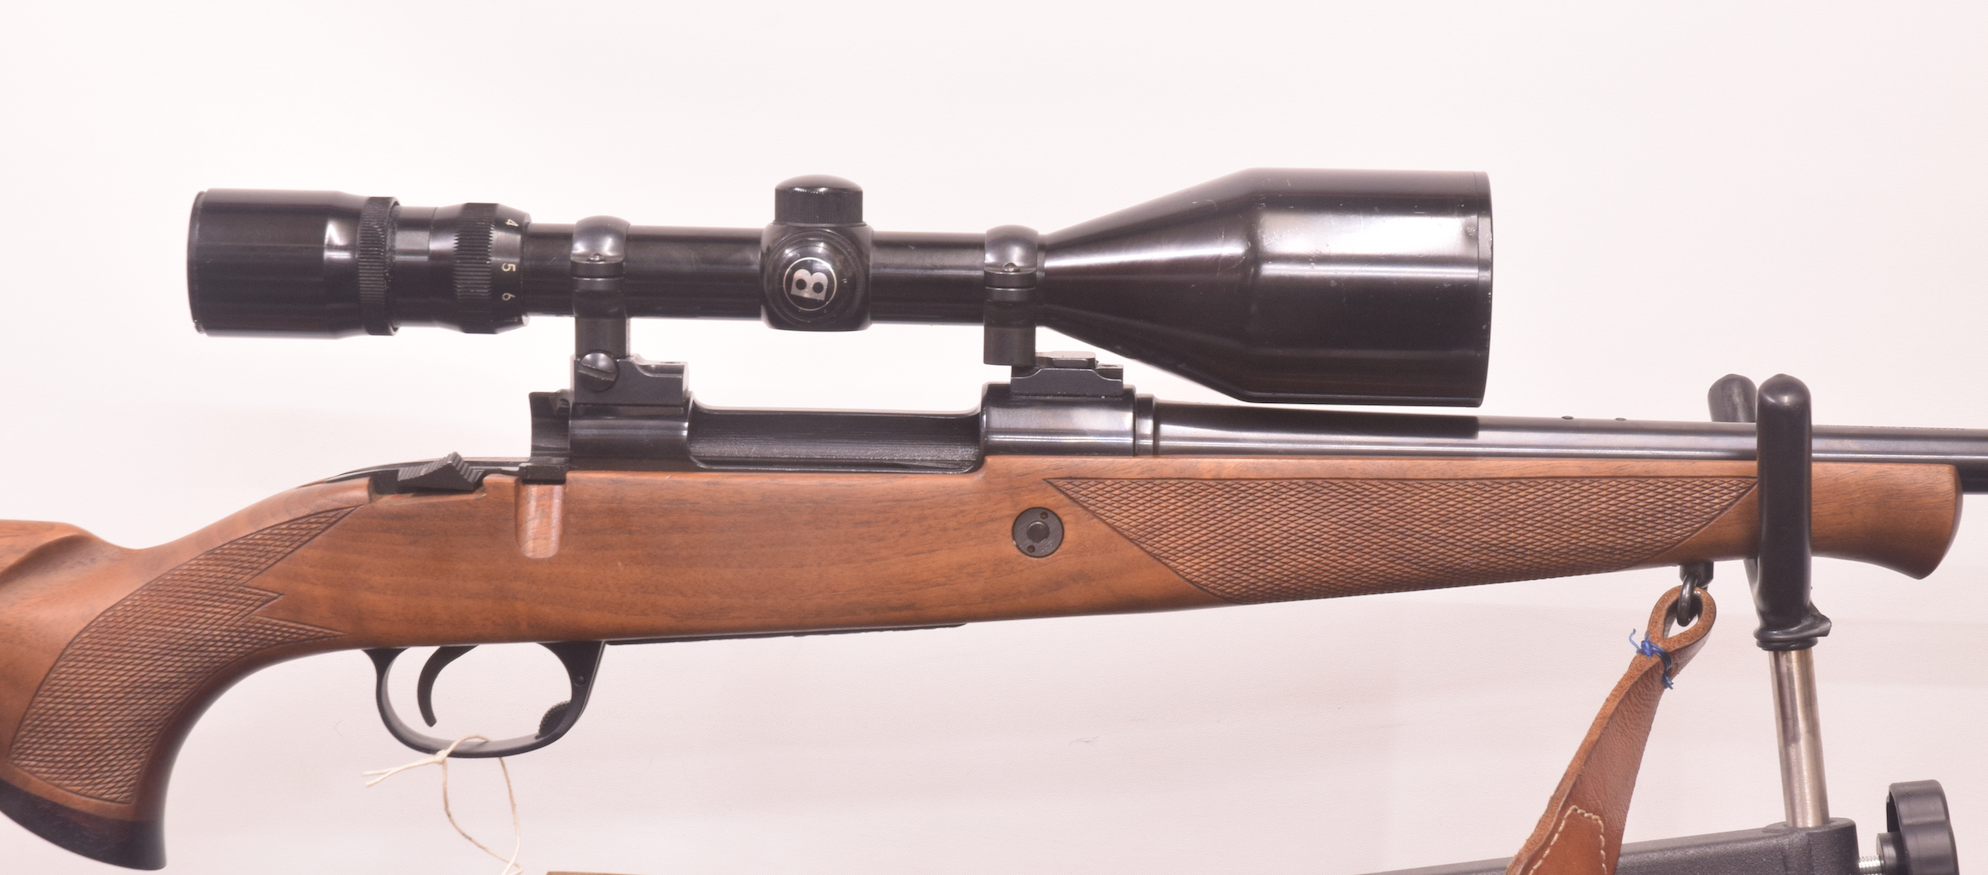 The 1 Pound Pack-Rifle (And Fishing Pole!) -The Firearm Blog